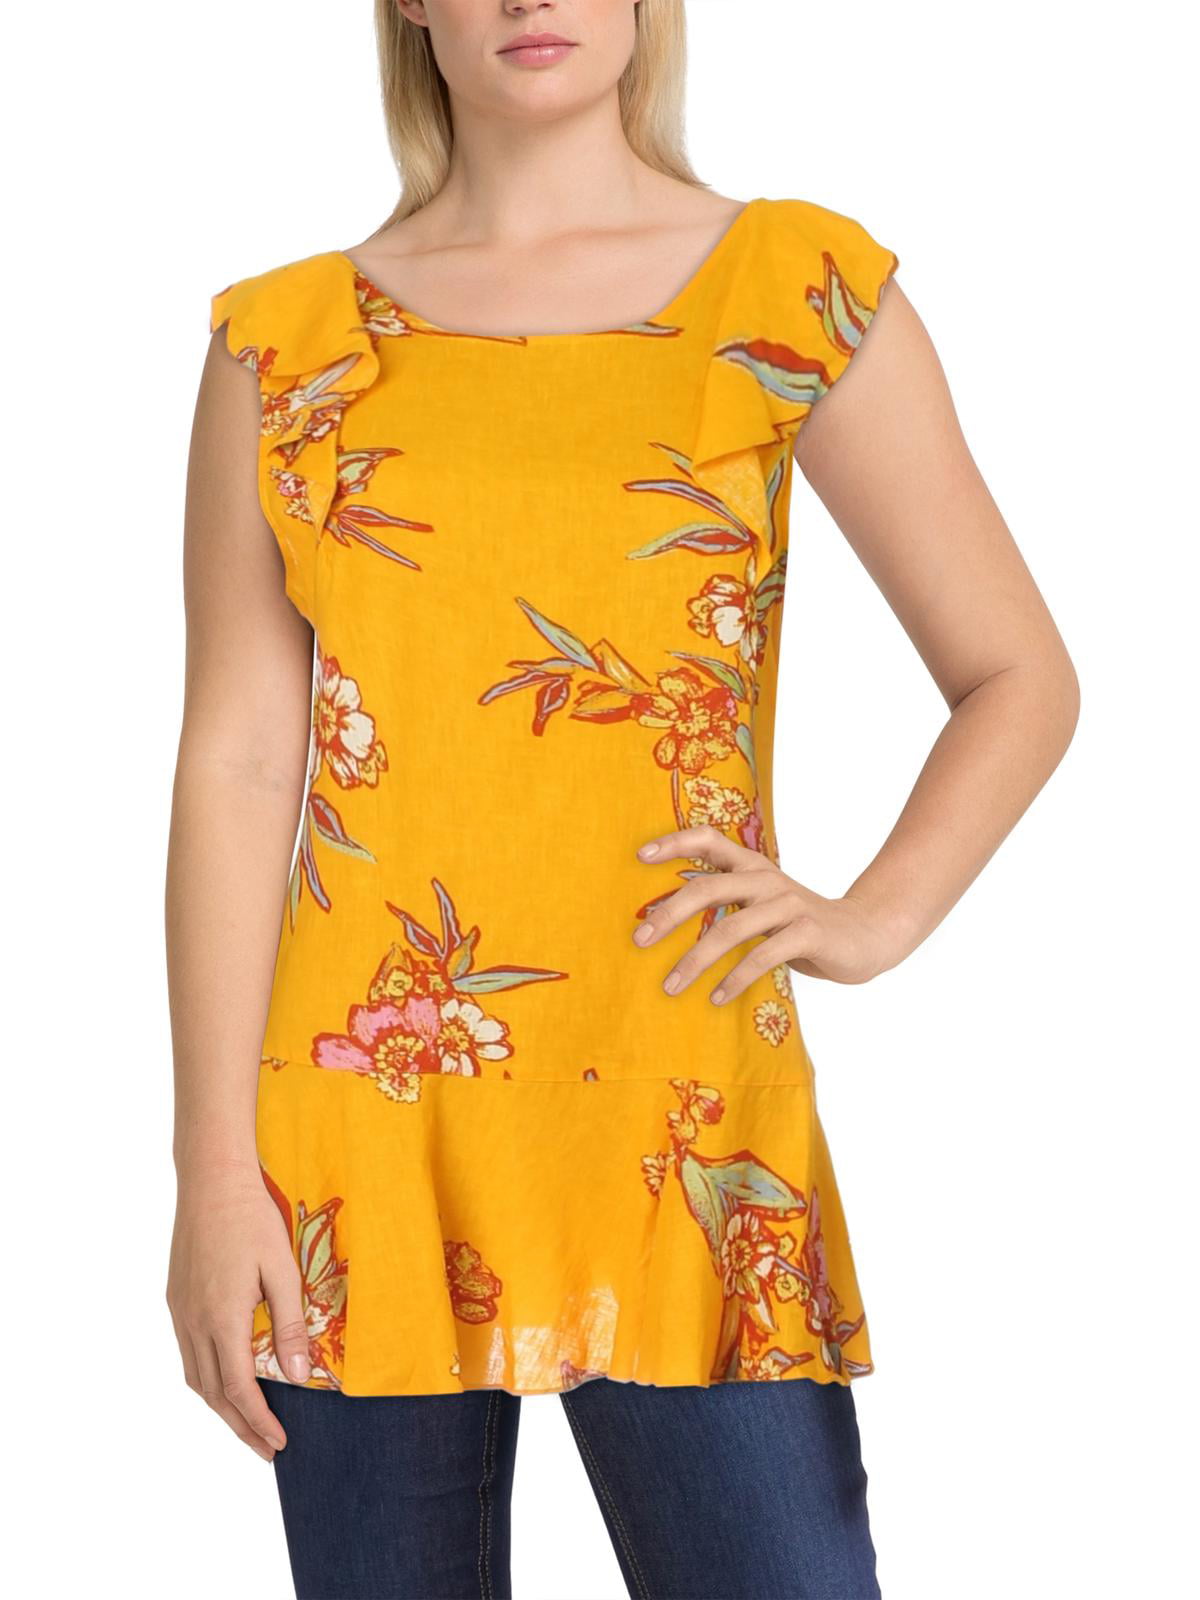 Free People Womens Summer In Tulum Linen Floral Tunic Top Shirt BHFO 9813 